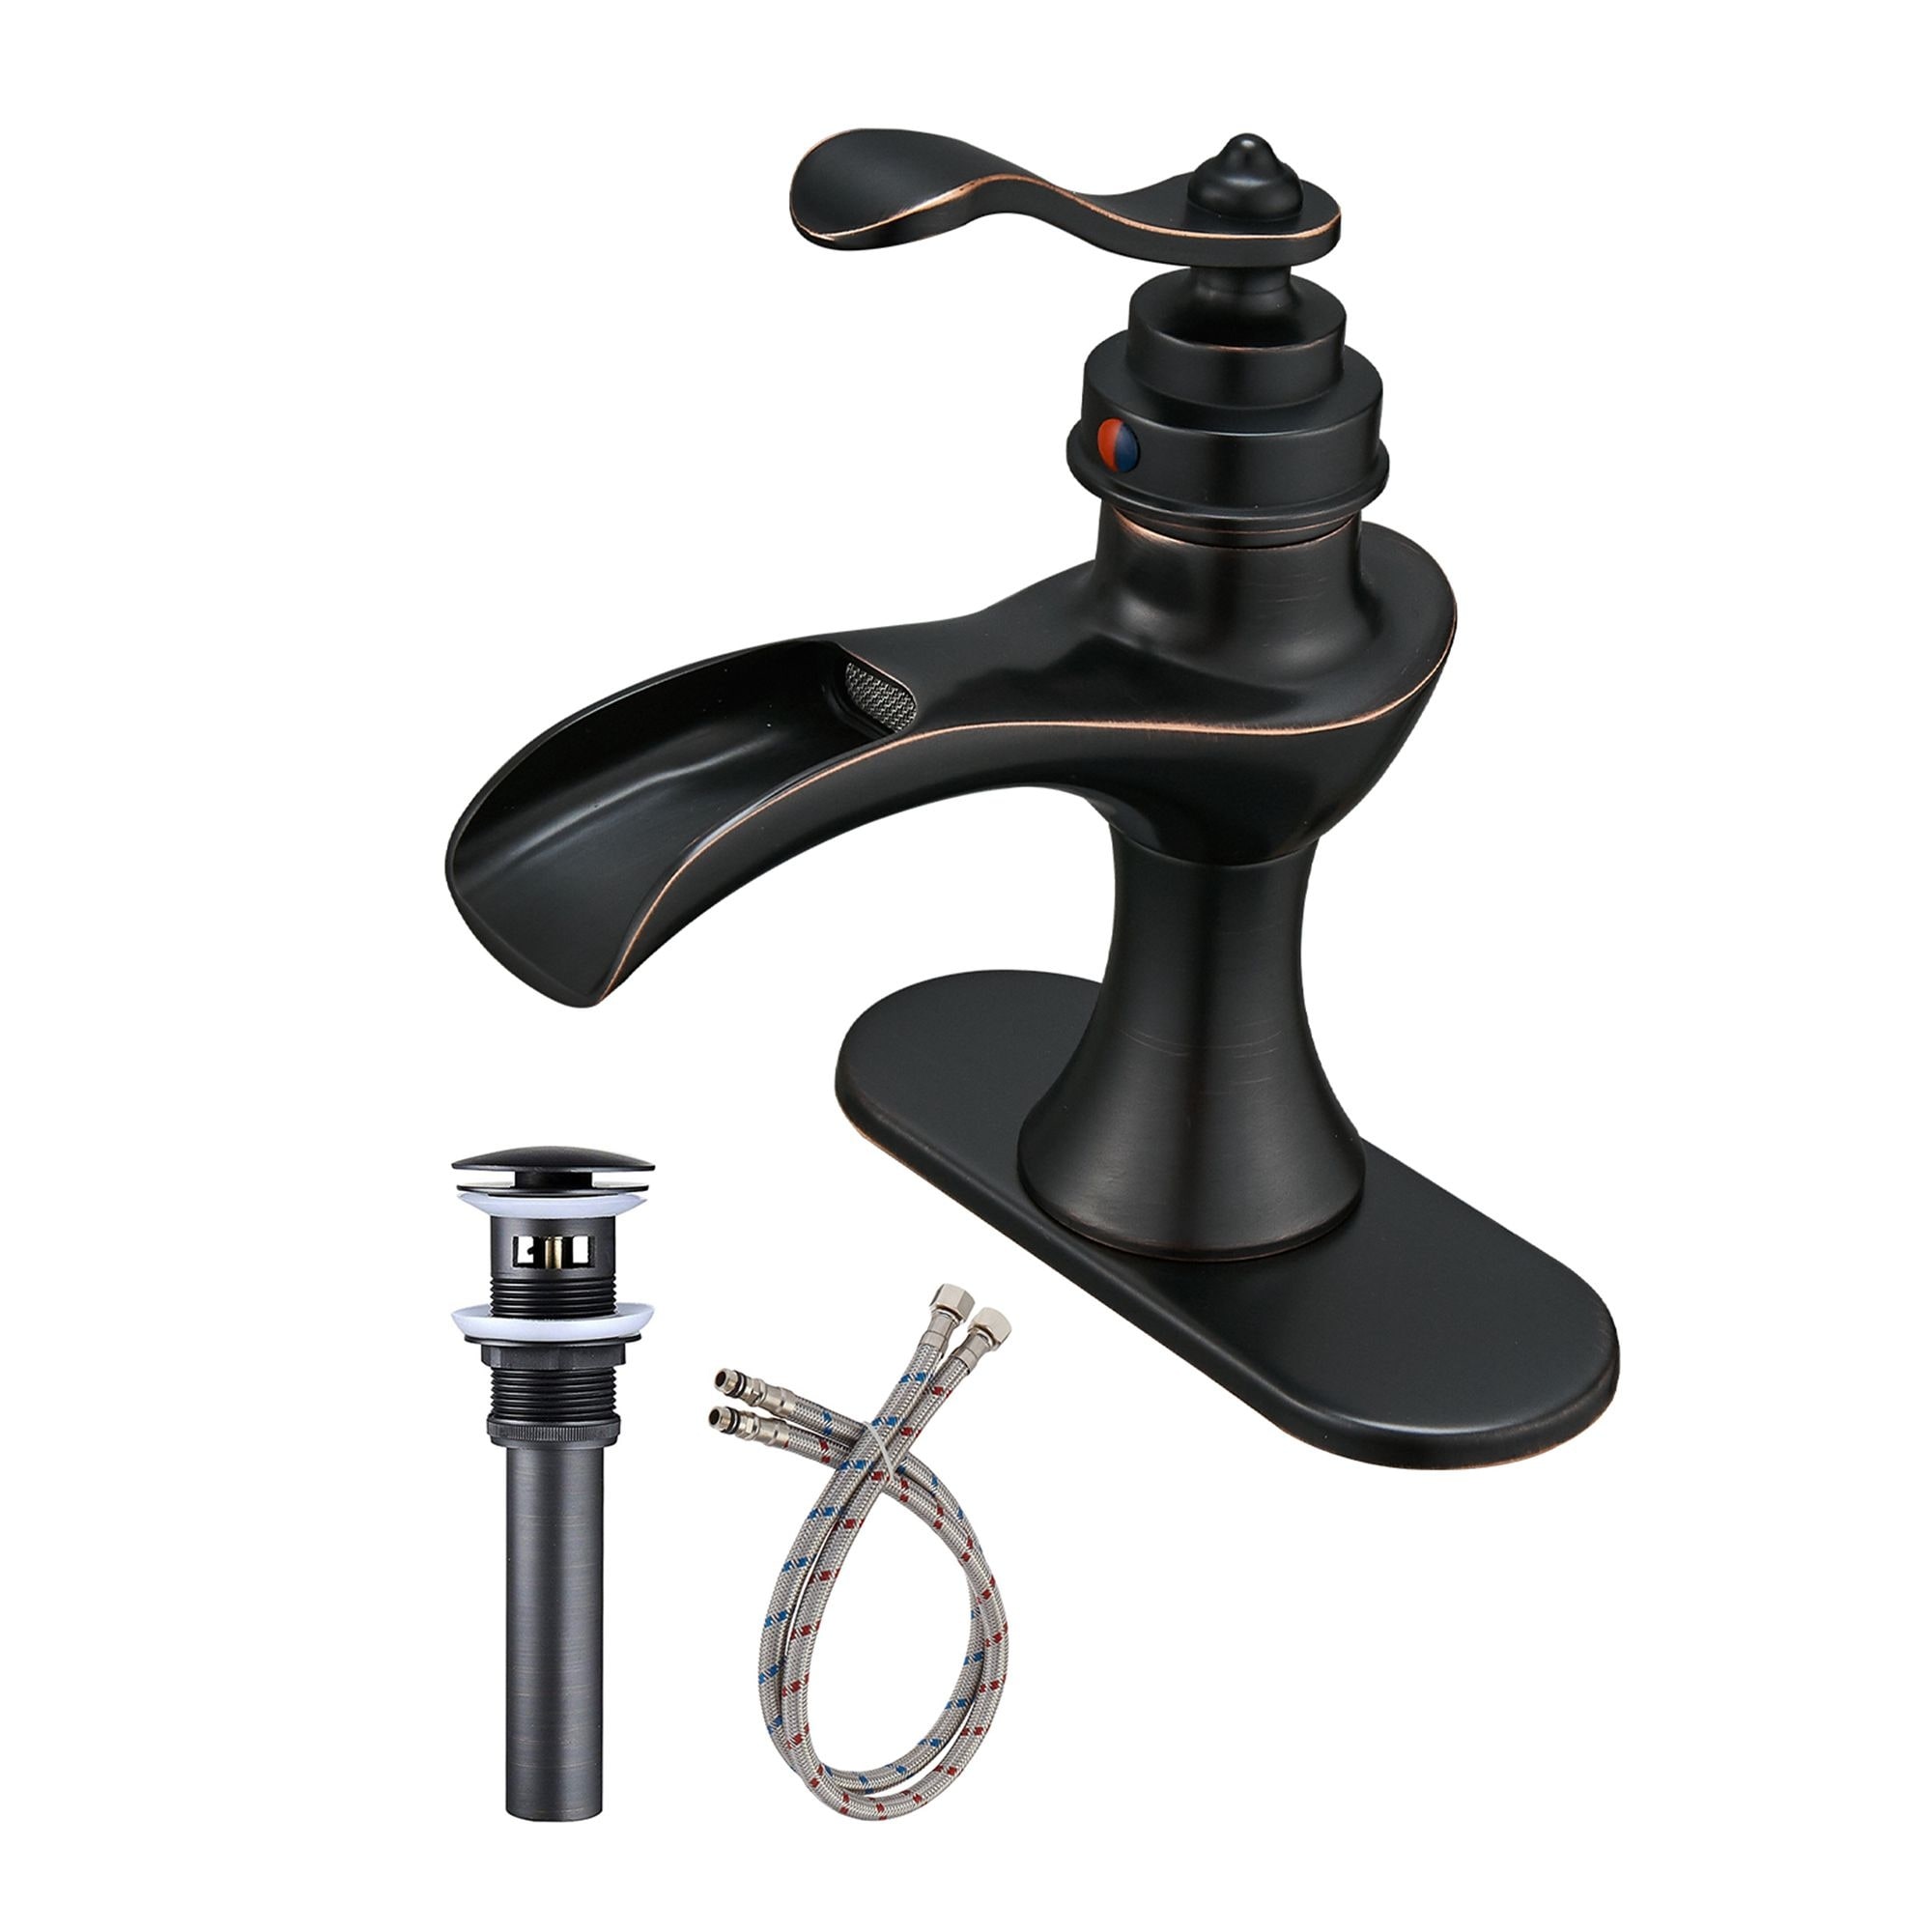 ShiSyan Bathroom Sink Faucet Basin Mixer Tap Black Oil Rubbed Bronze Brass Retro Brushed Hot and Cold Water Single Lever Basin Sink Tap Bathroom Bar Faucet 